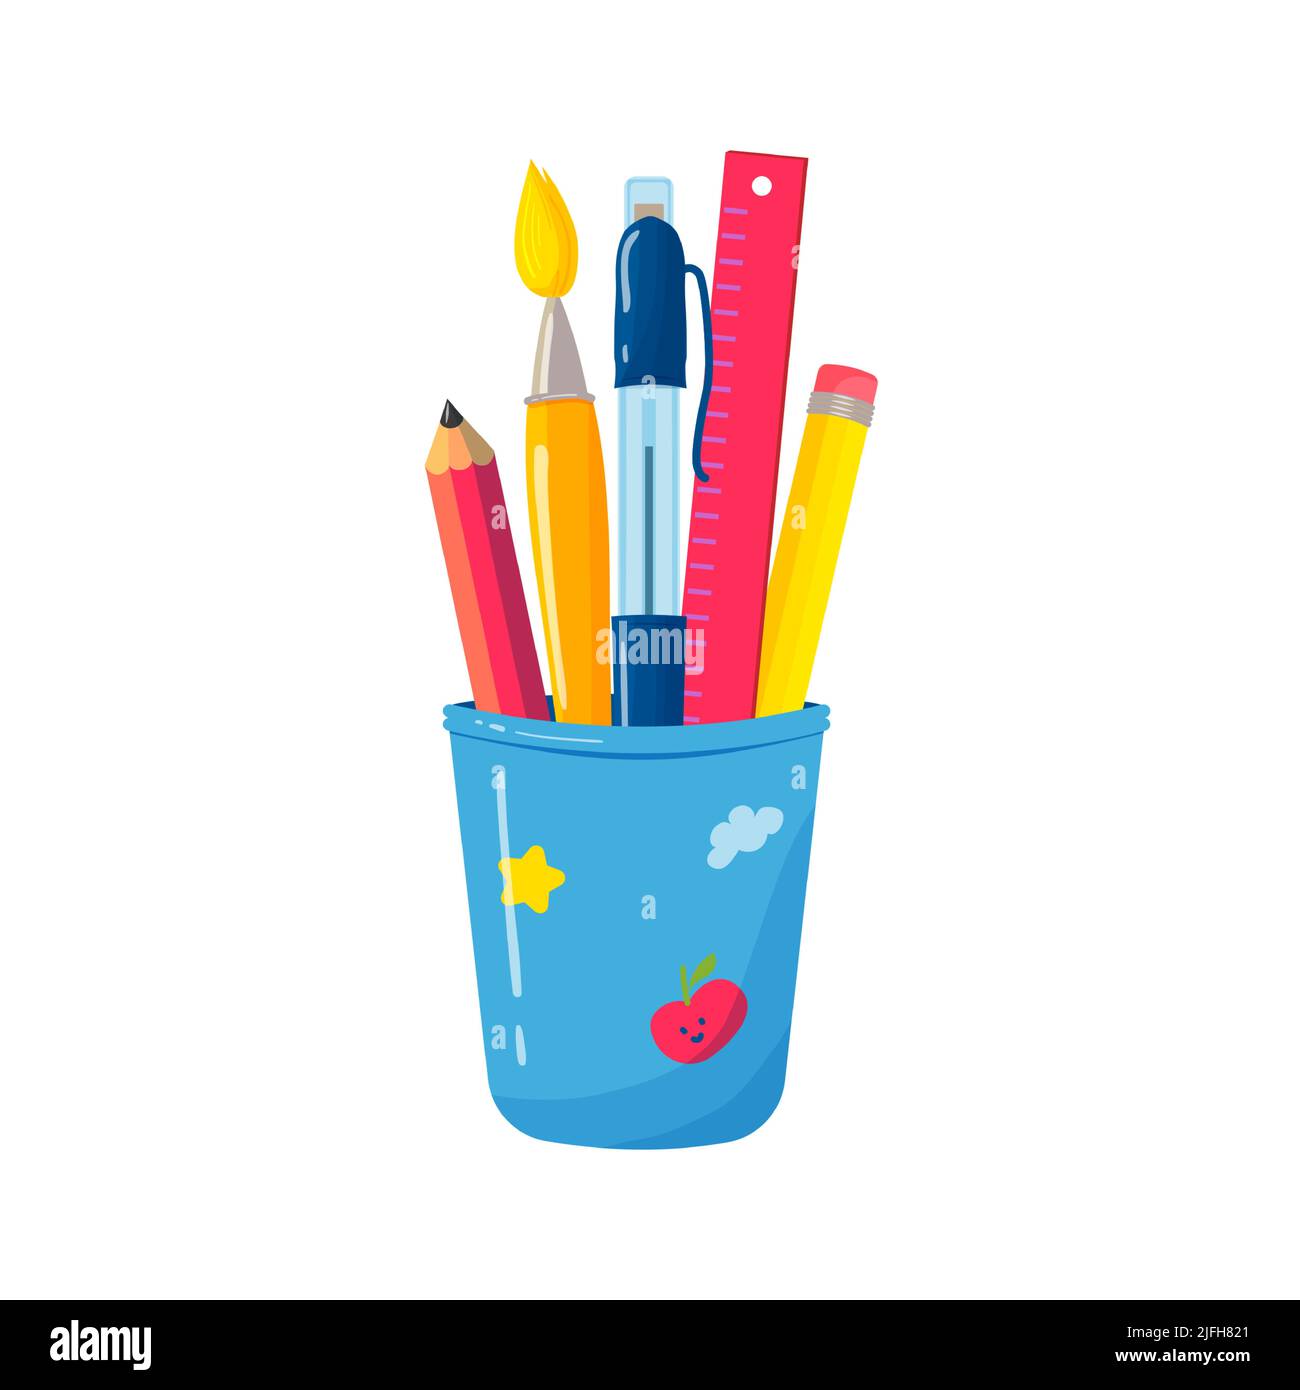 School or office Cup for pens and pencils. Bright flat vector illustration on a white background. Pen, brush, pencils, and ruler stationery holder. Stock Vector